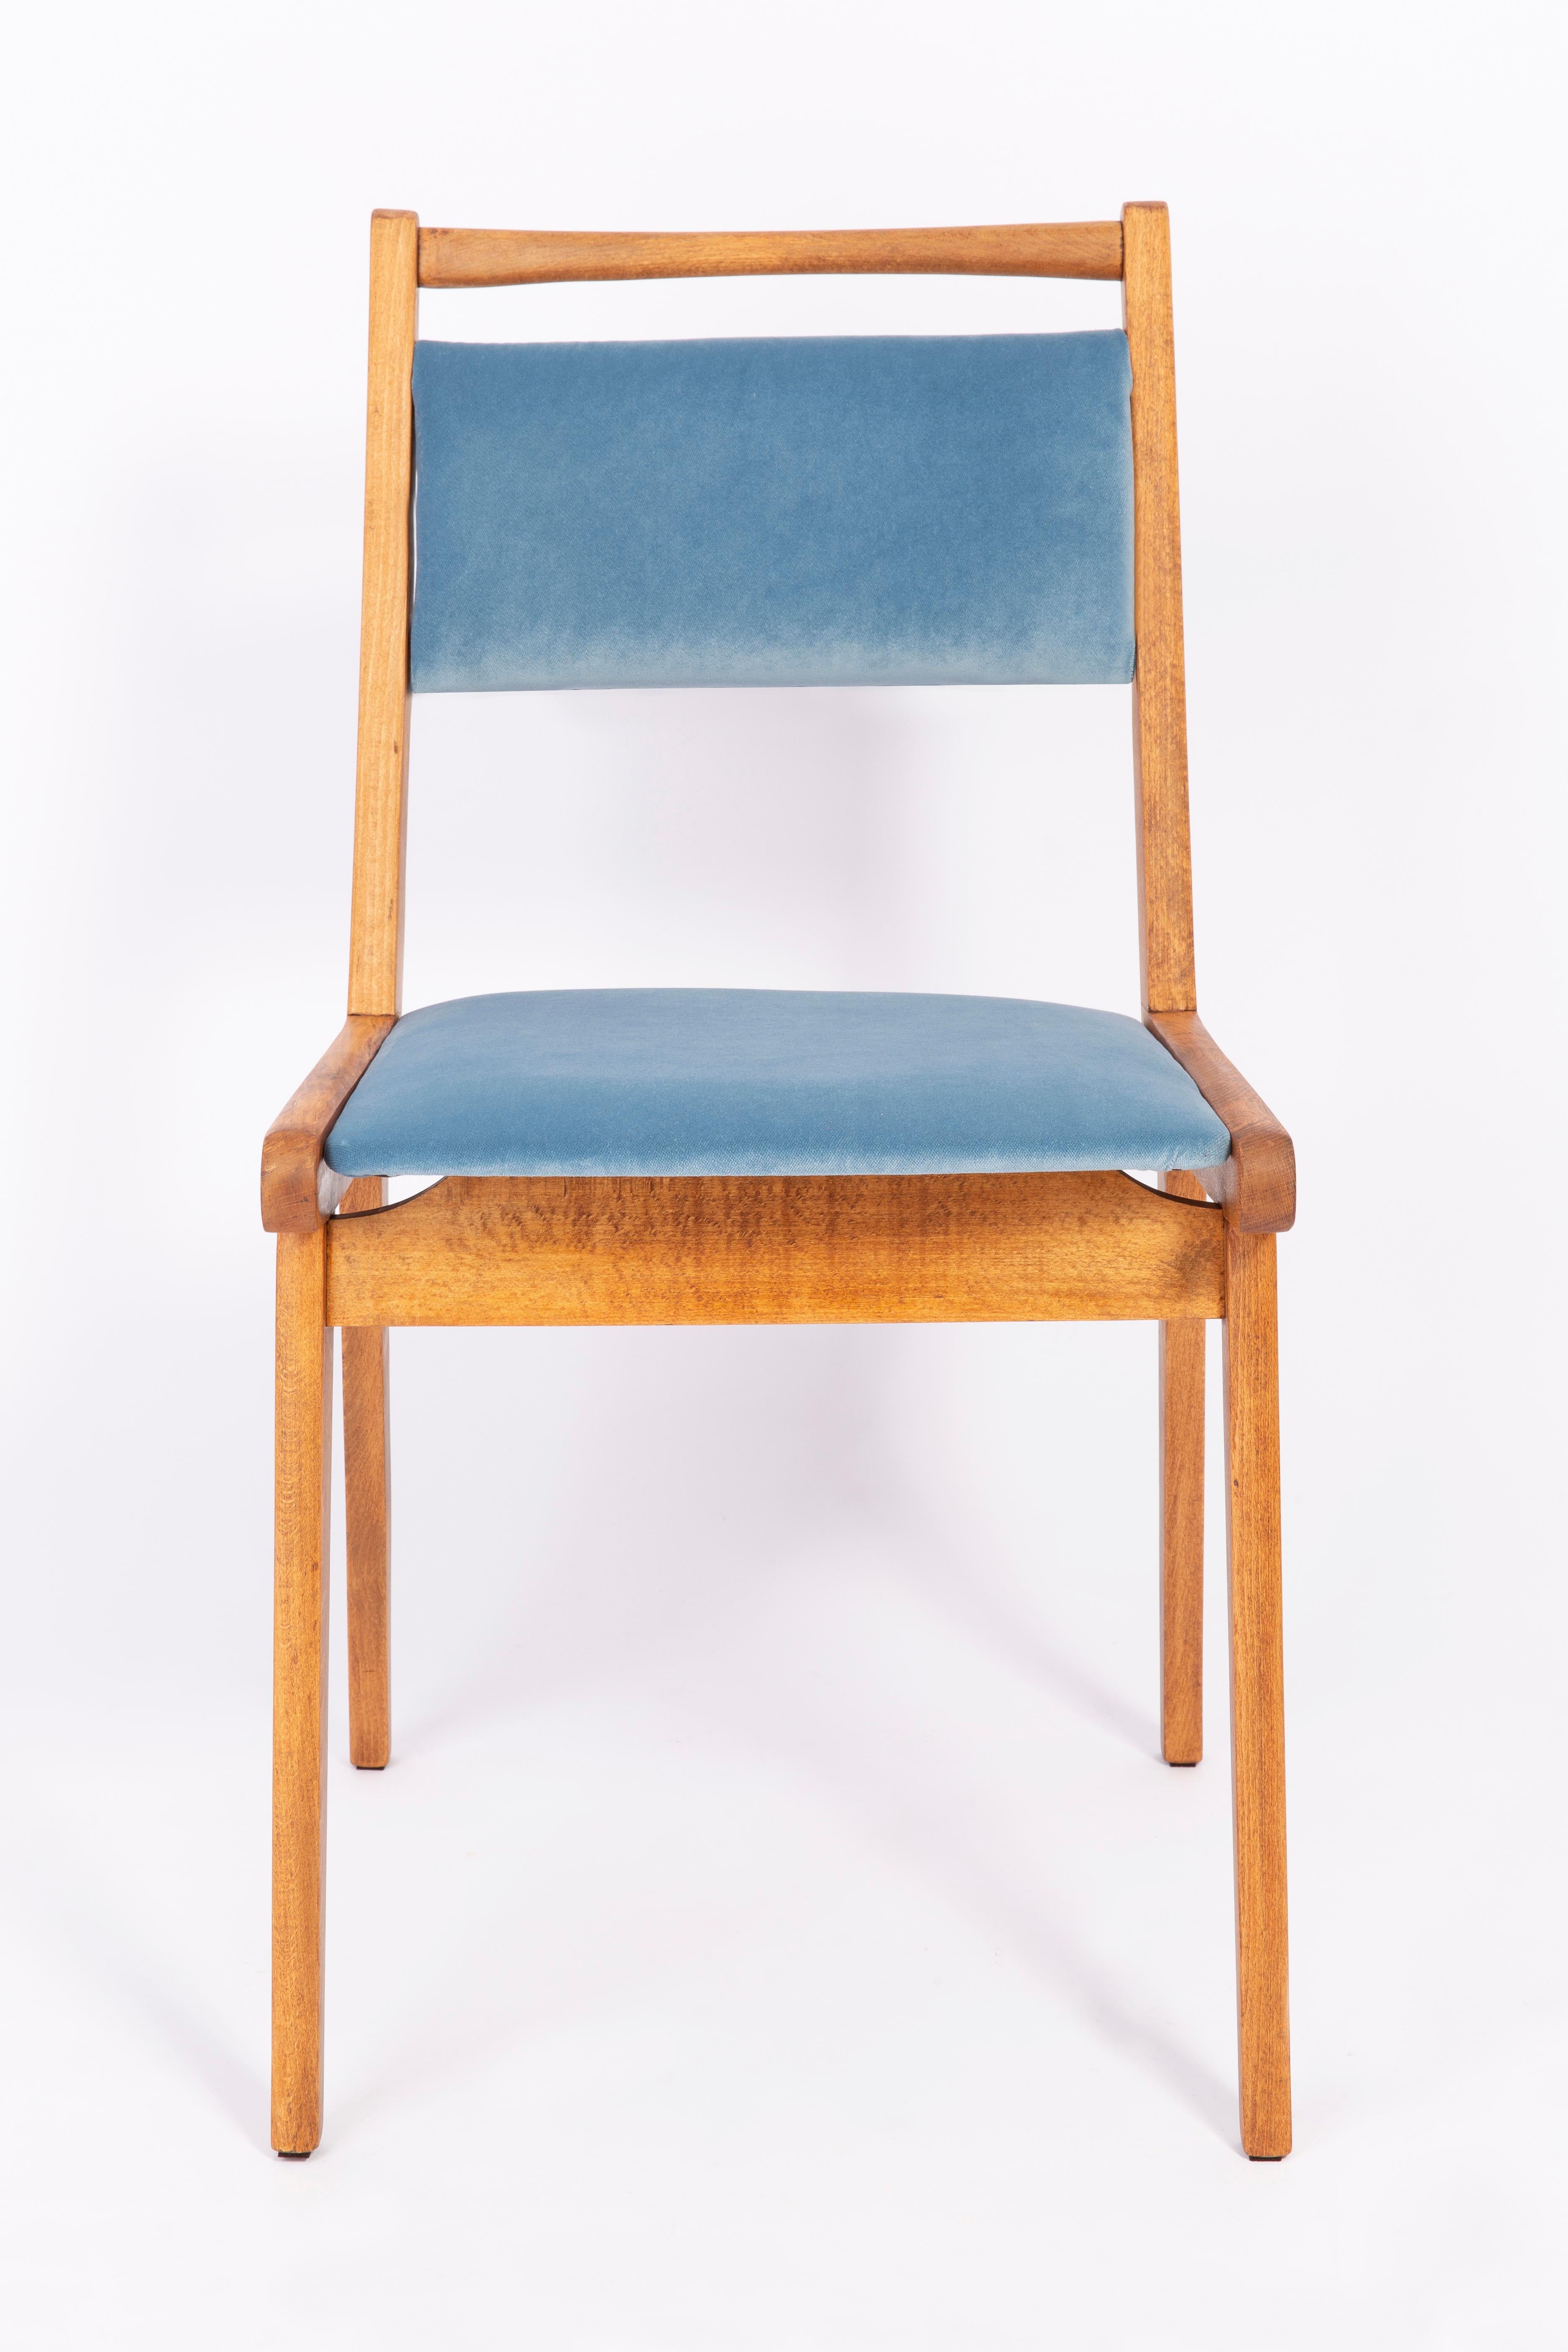 Set of Four 20th Century Blue Velvet Chairs, Poland, 1960s For Sale 2